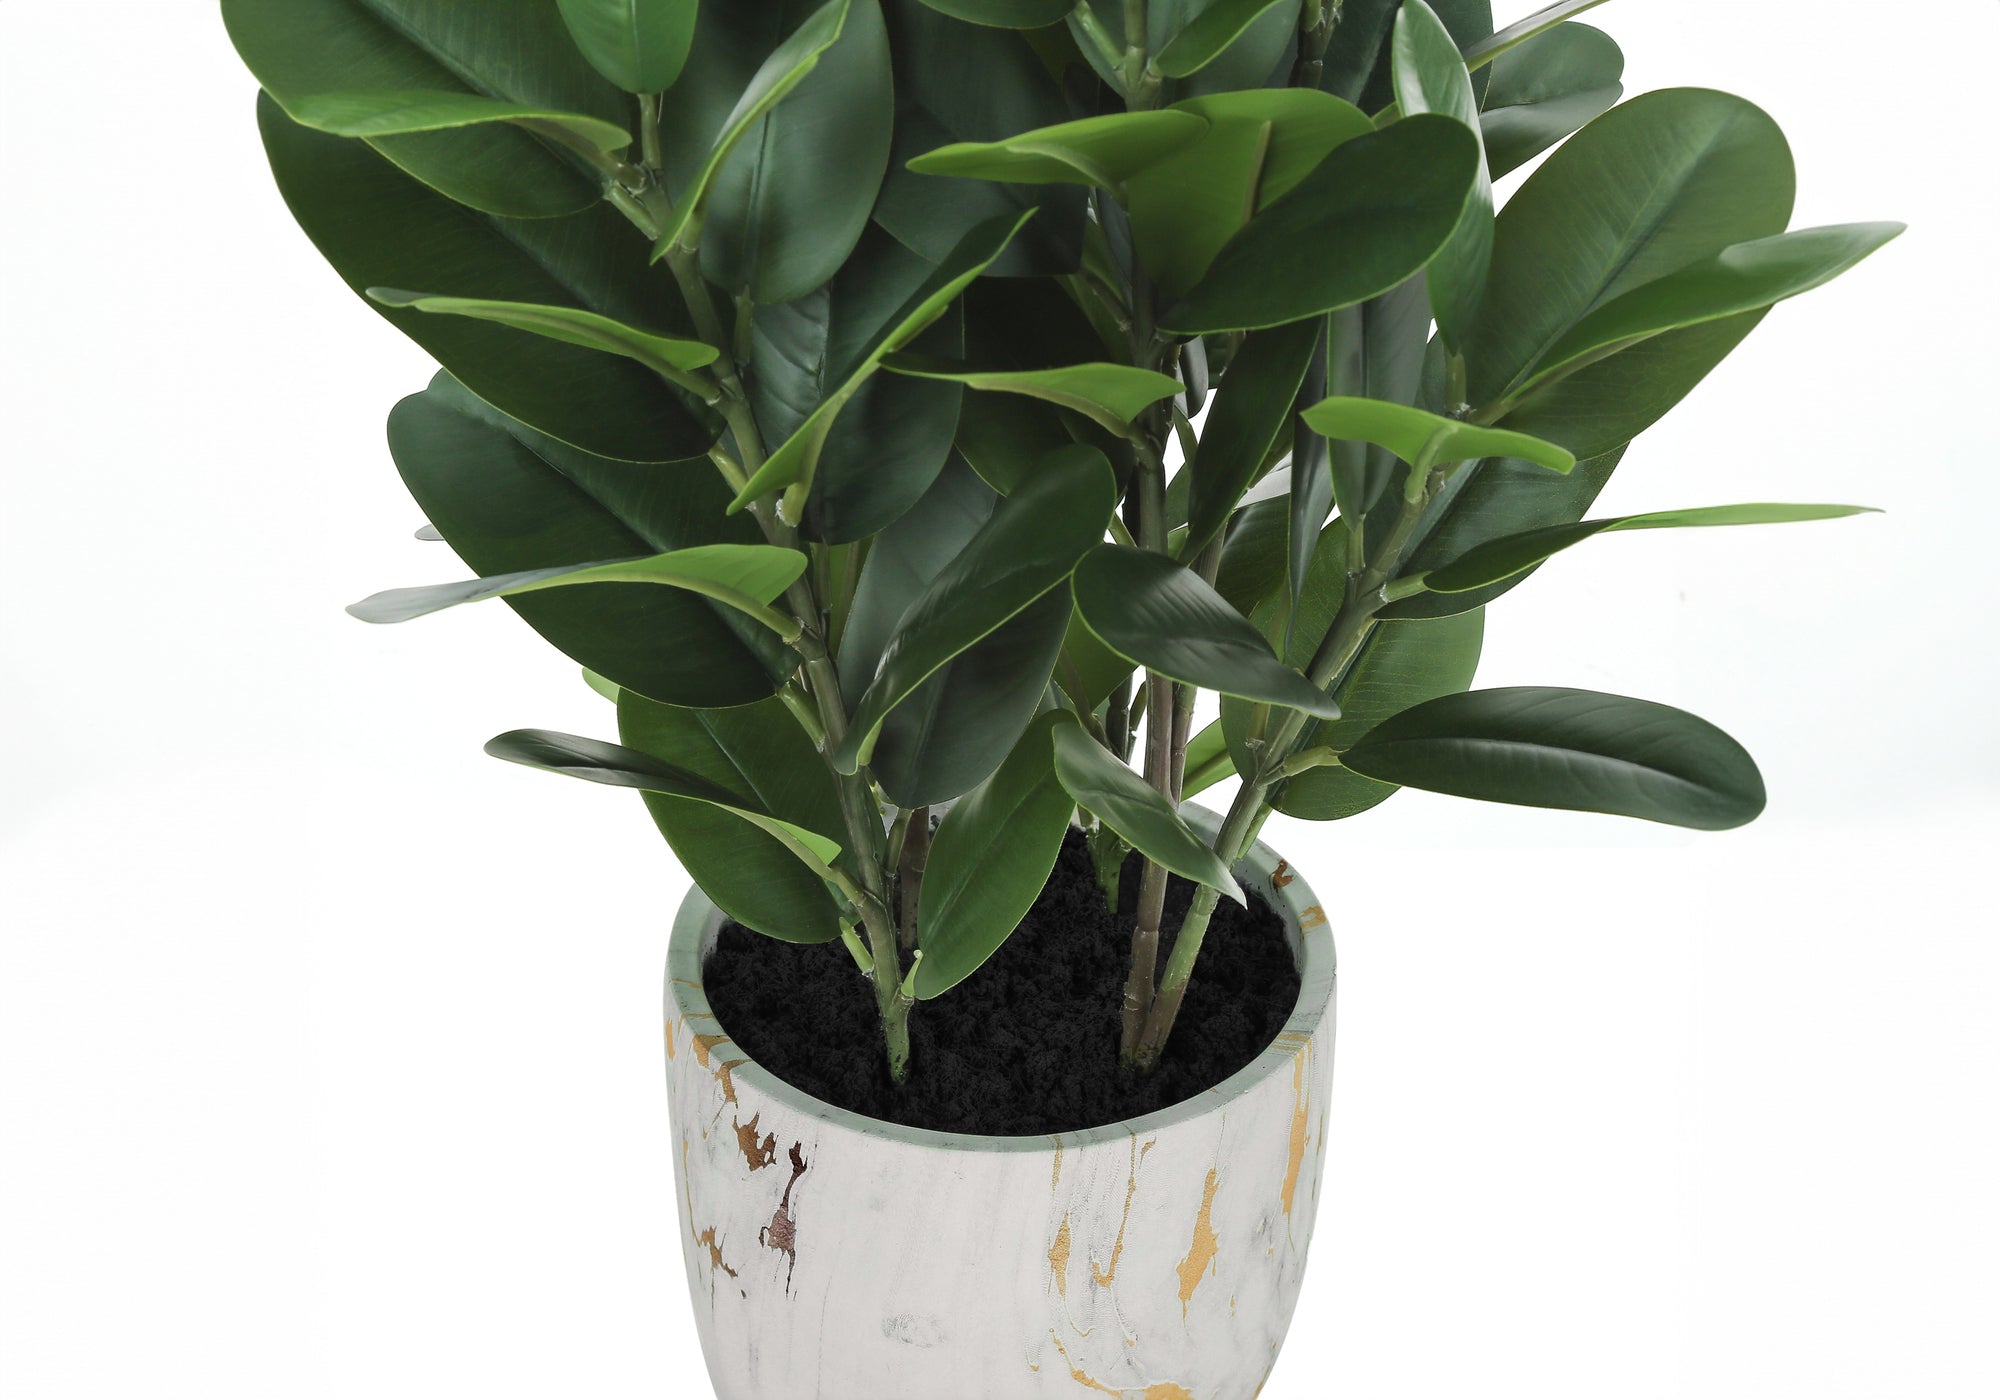 MN-289507    Artificial Plant, 31" Tall, Garcinia Tree, Indoor, Faux, Fake, Floor, Greenery, Potted, Real Touch, Decorative, Green Leaves, White Cement Pot